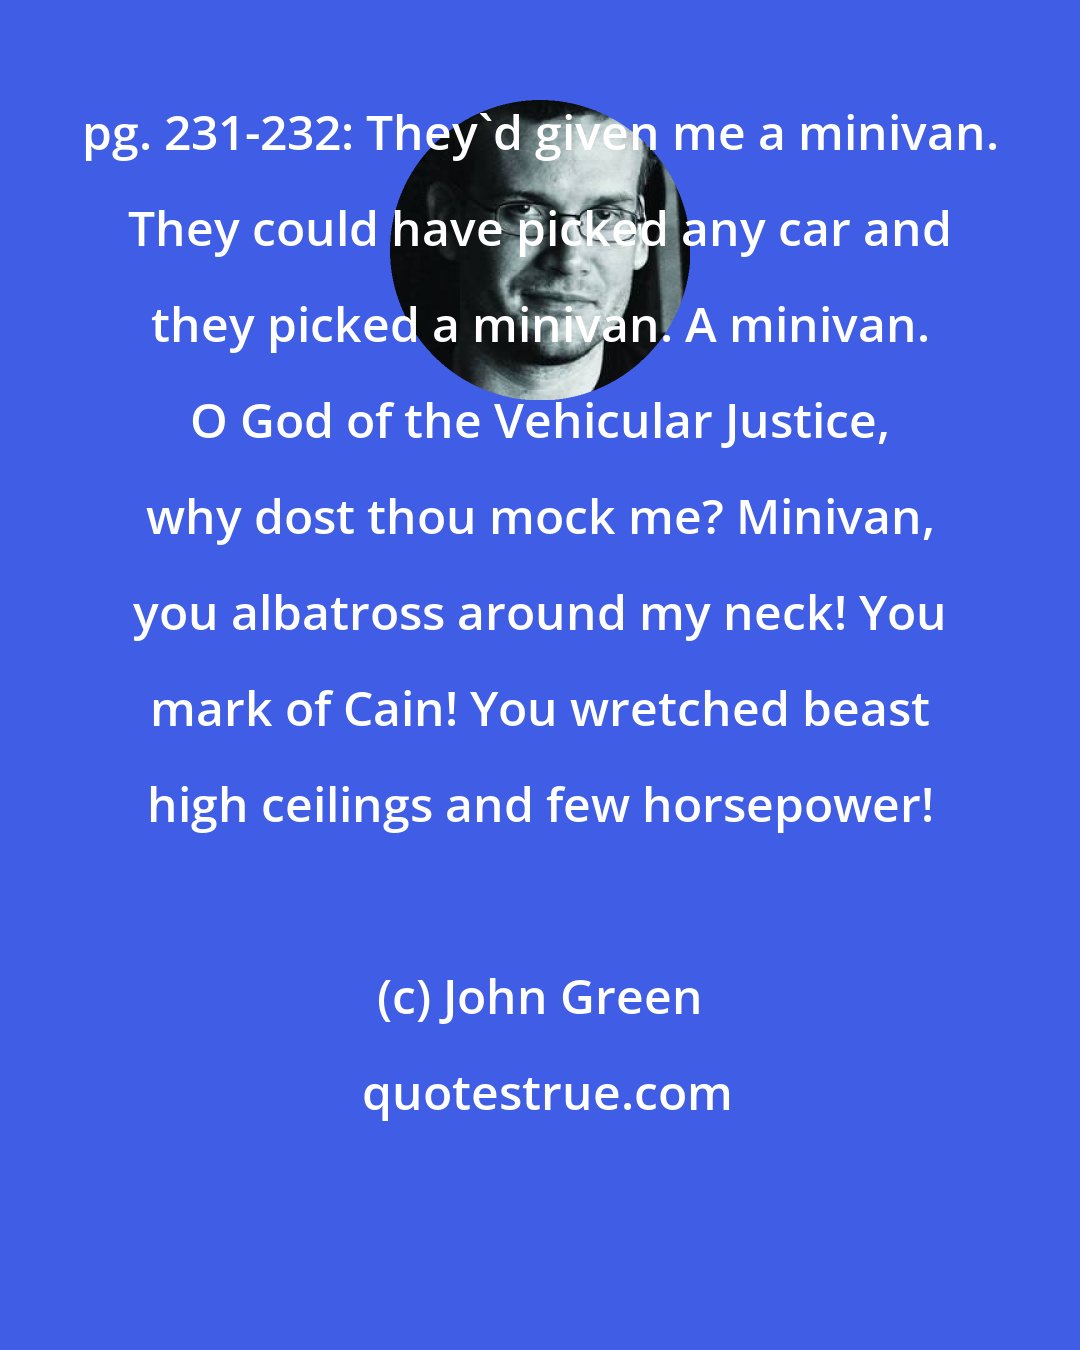 John Green: pg. 231-232: They'd given me a minivan. They could have picked any car and they picked a minivan. A minivan. O God of the Vehicular Justice, why dost thou mock me? Minivan, you albatross around my neck! You mark of Cain! You wretched beast high ceilings and few horsepower!